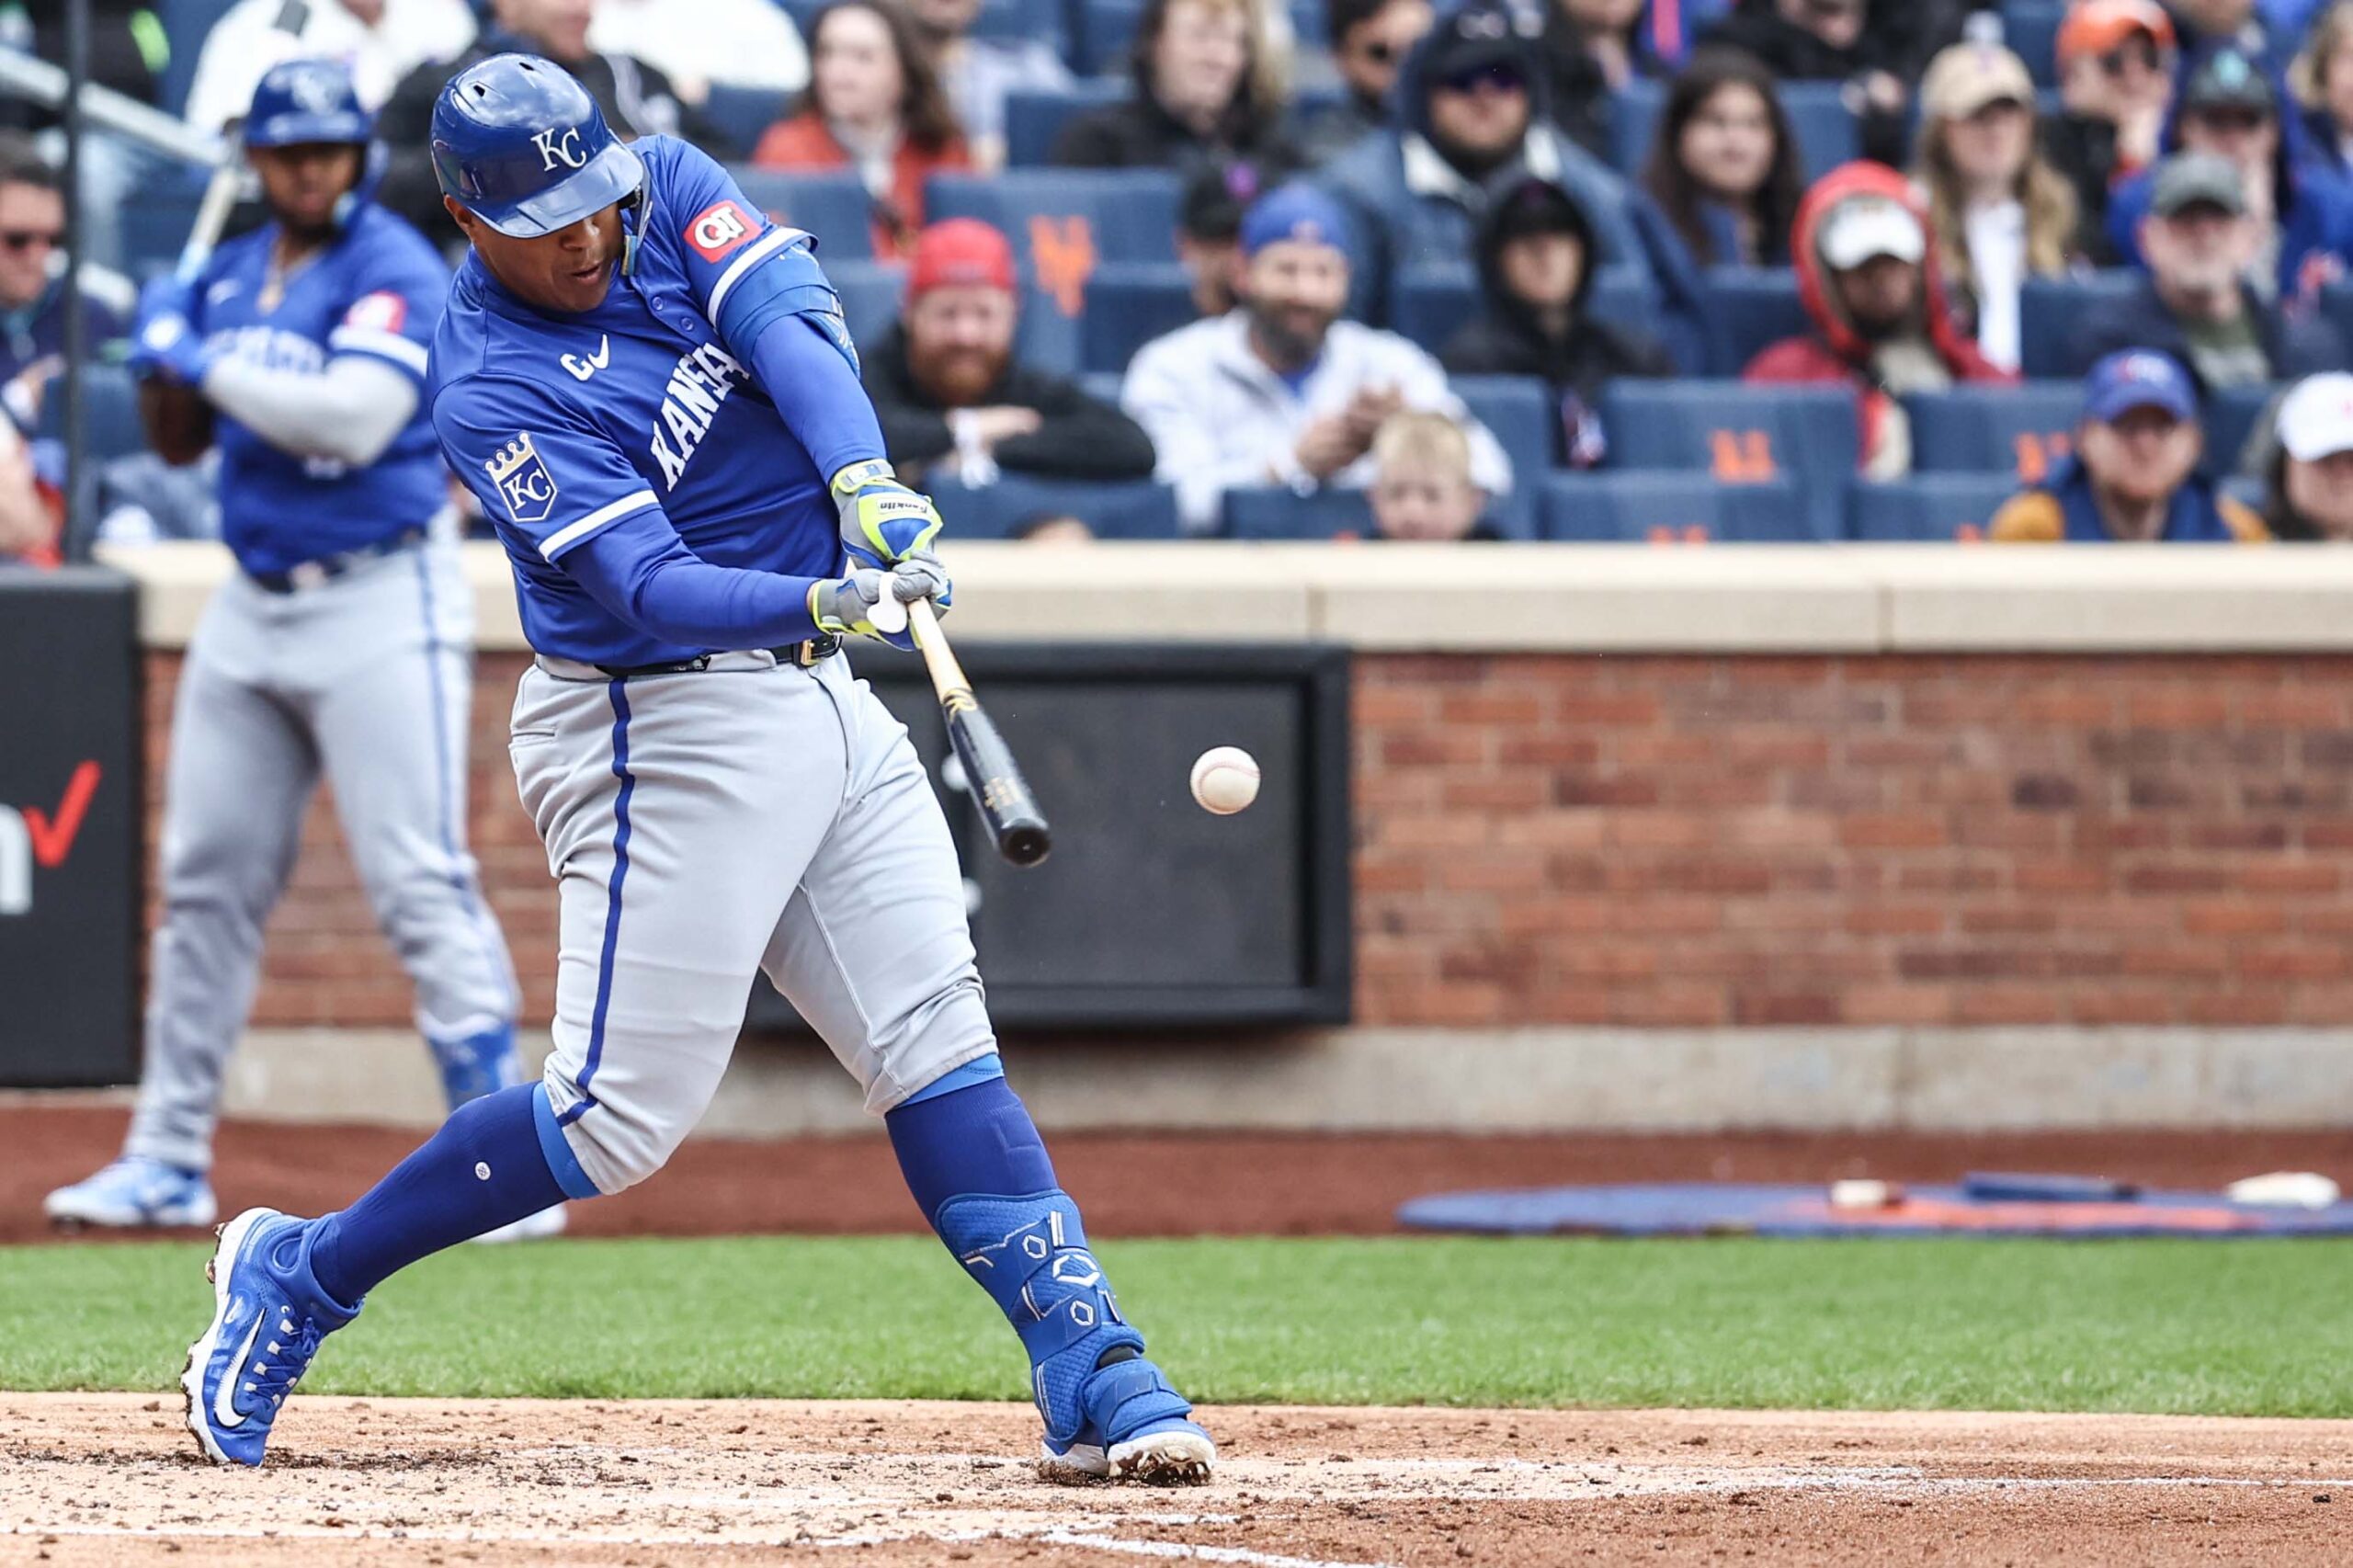 The Kansas City Royals are turning heads this season, led by Salvador Perez.